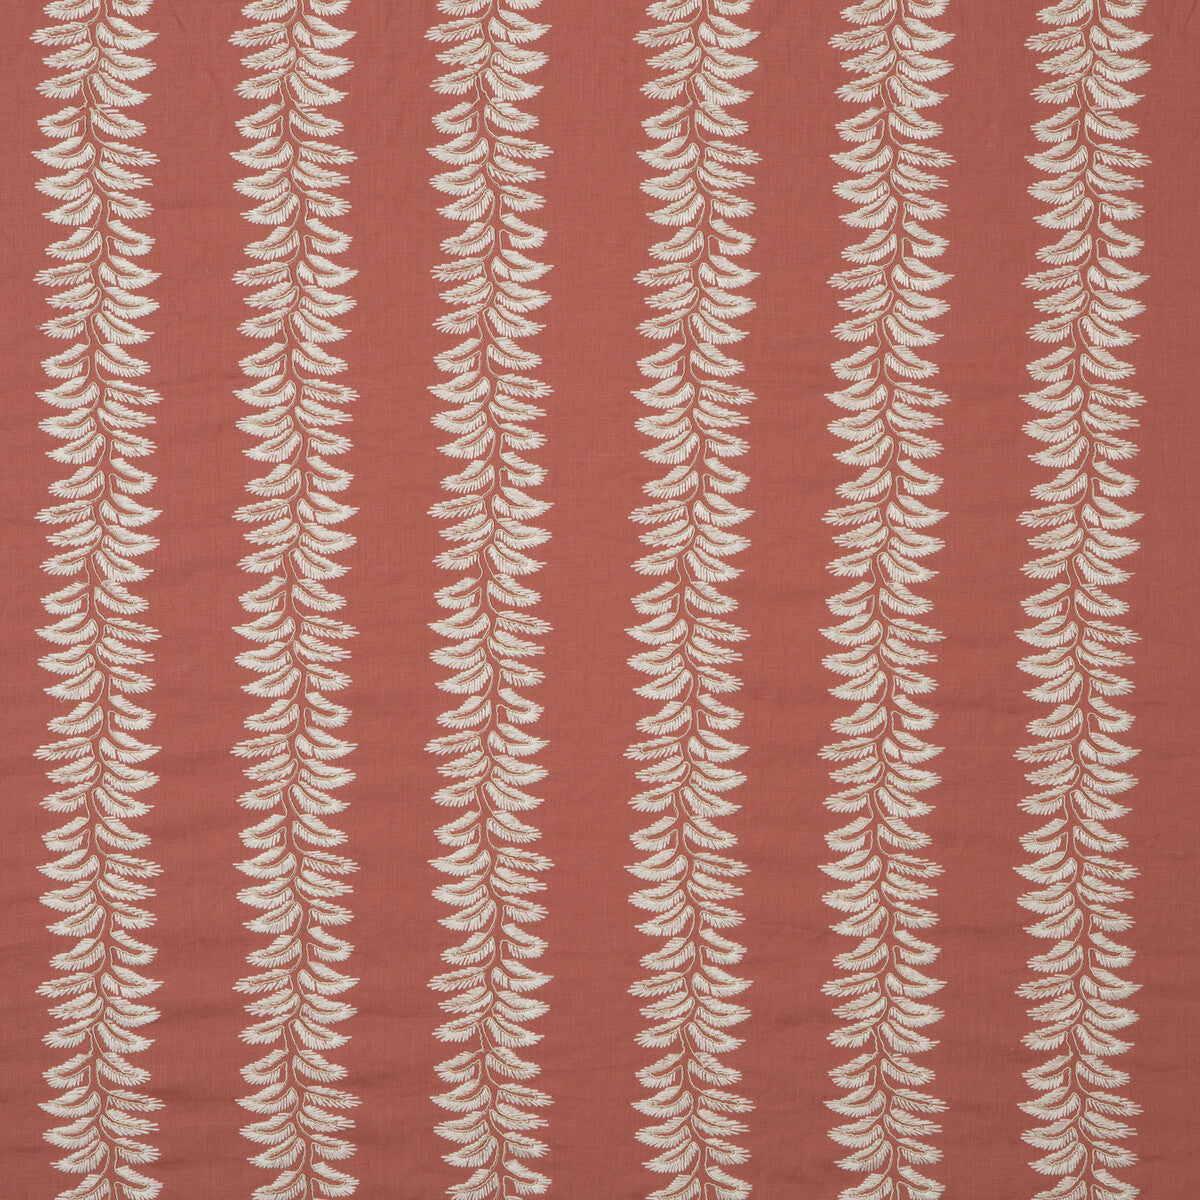 New Bradbourne fabric in coral color - pattern BF10963.310.0 - by G P &amp; J Baker in the Langdale collection